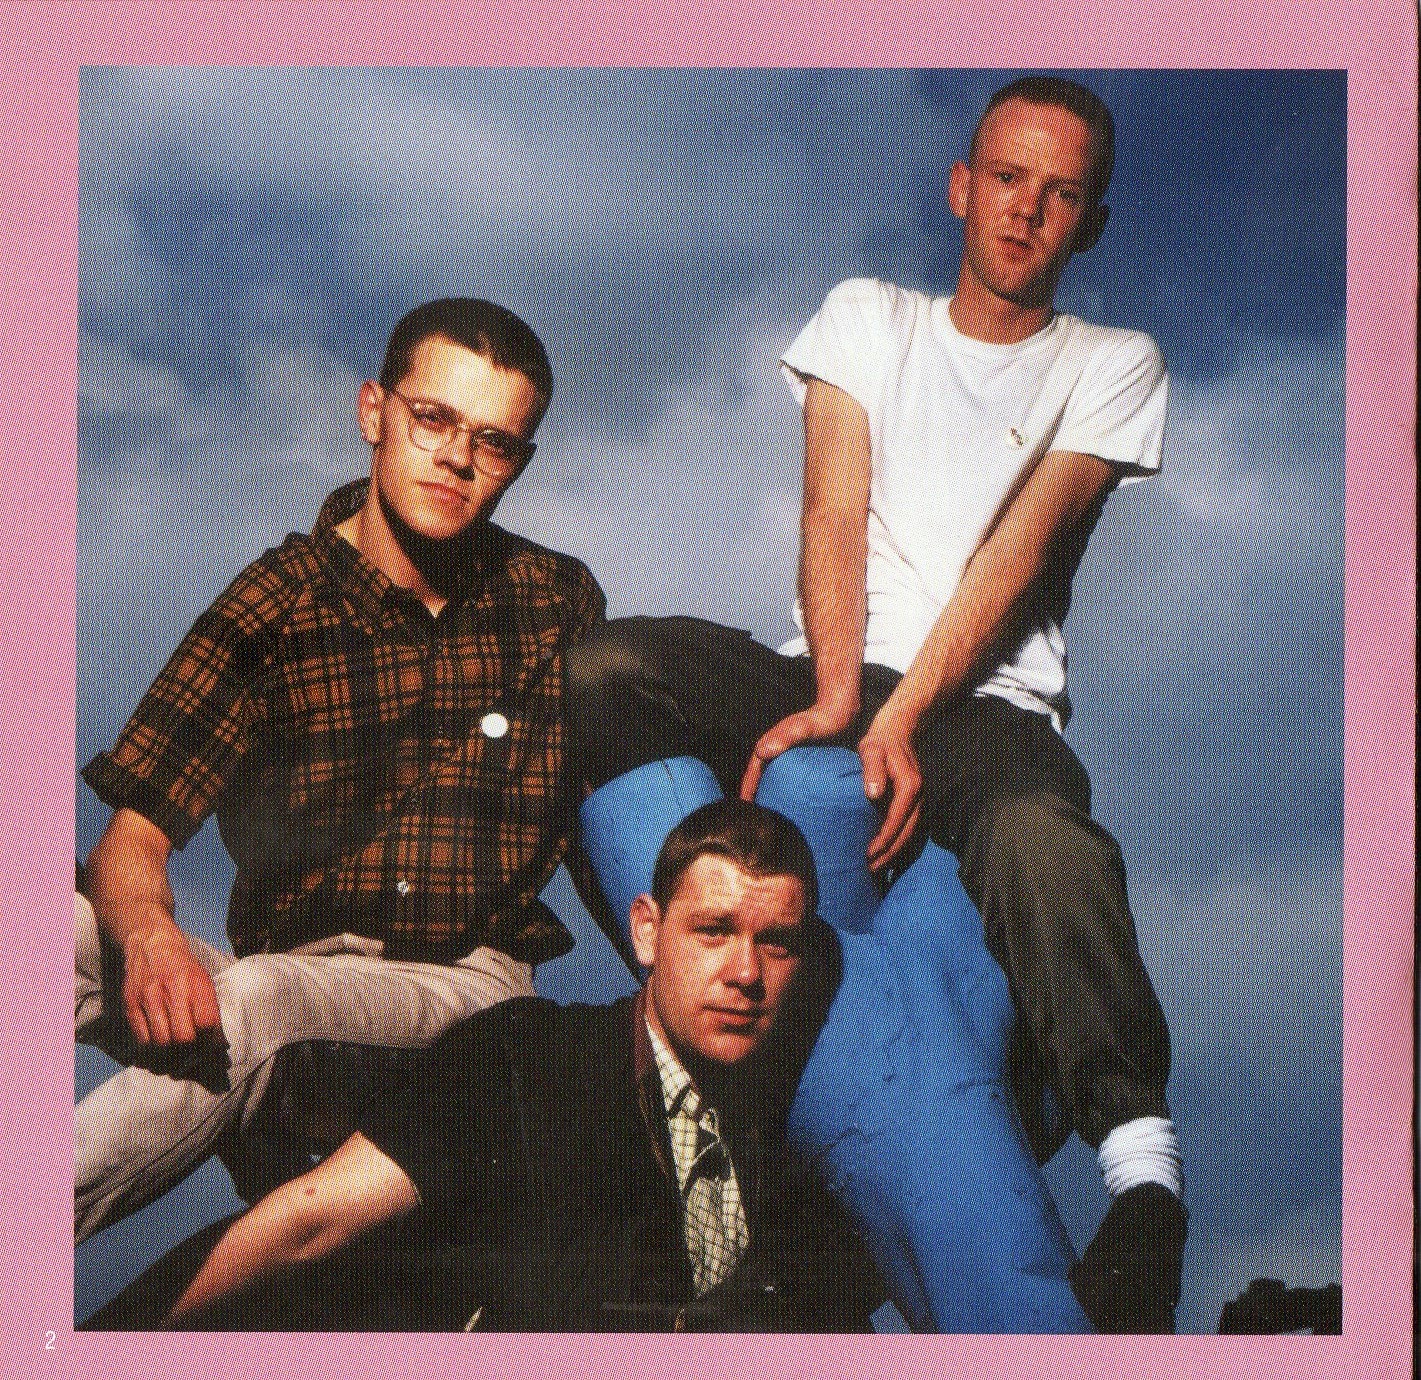 MUSICOLLECTION BRONSKI BEAT The Age Of Consent (Deluxe Version) 1984 2012